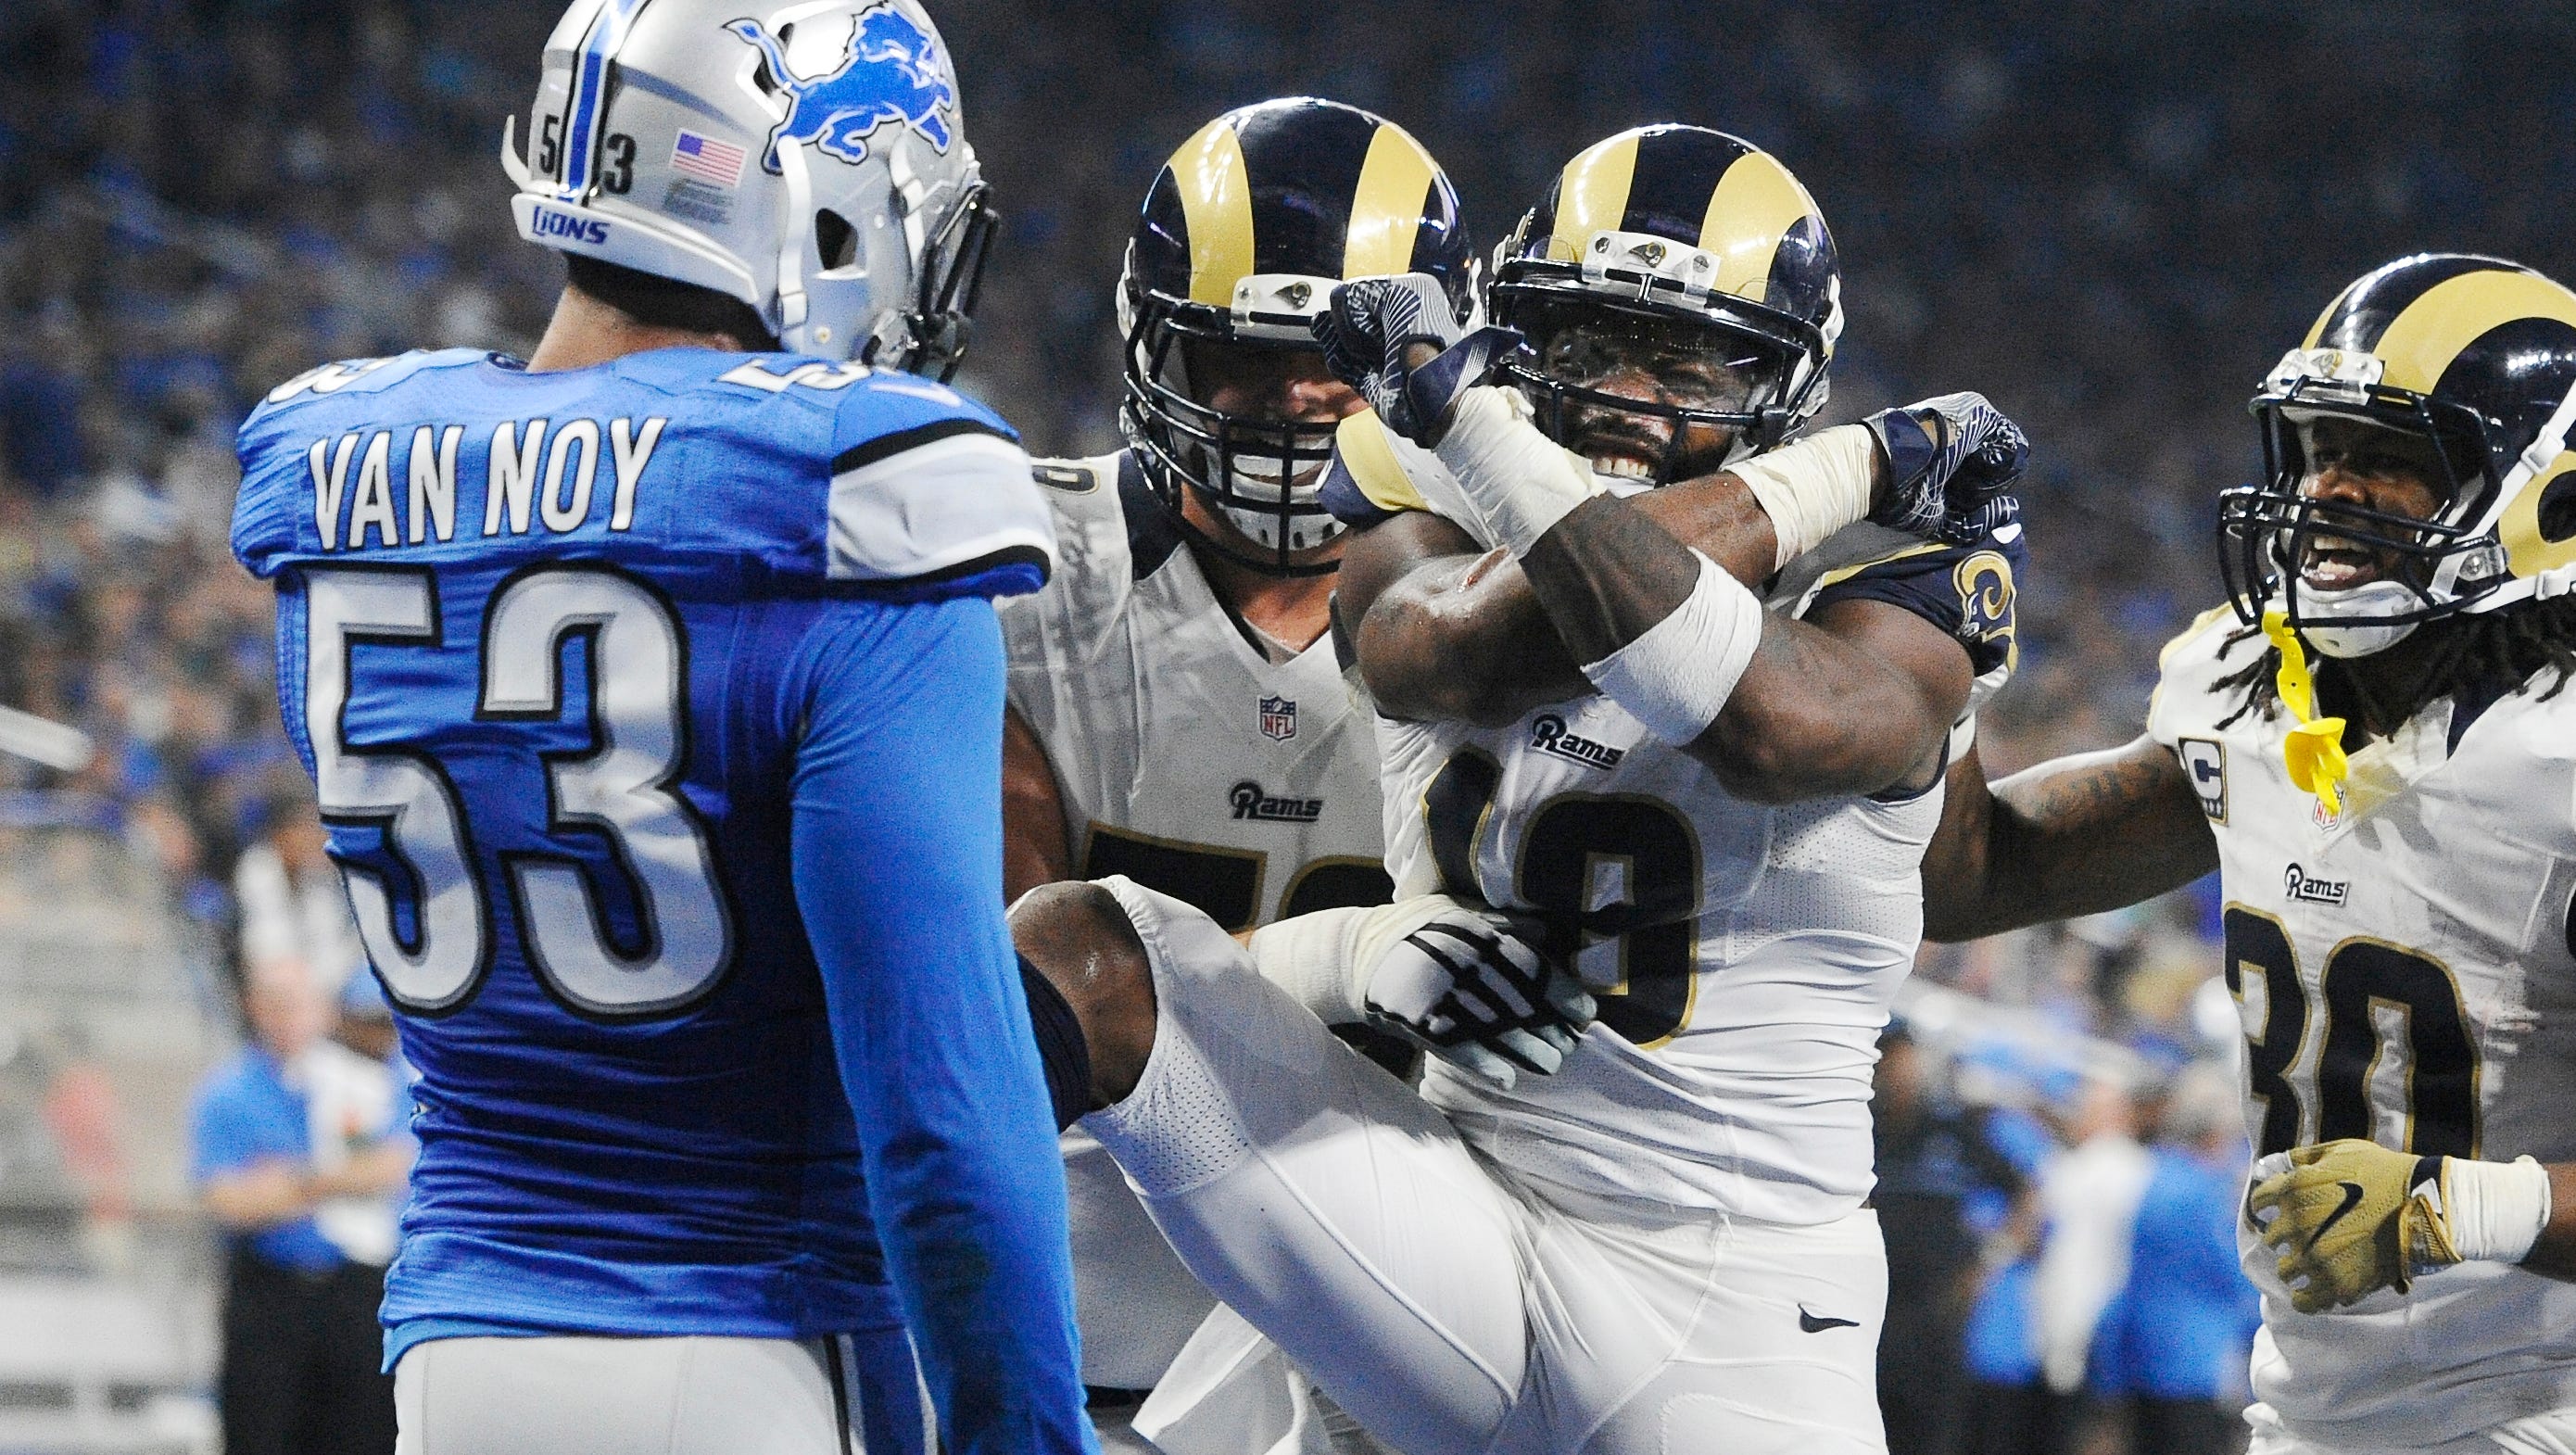 Rams wide receiver Kenny Britt celebrates a touchdown reception run in front of Lions Kyle Van Noy in the fourth quarter.